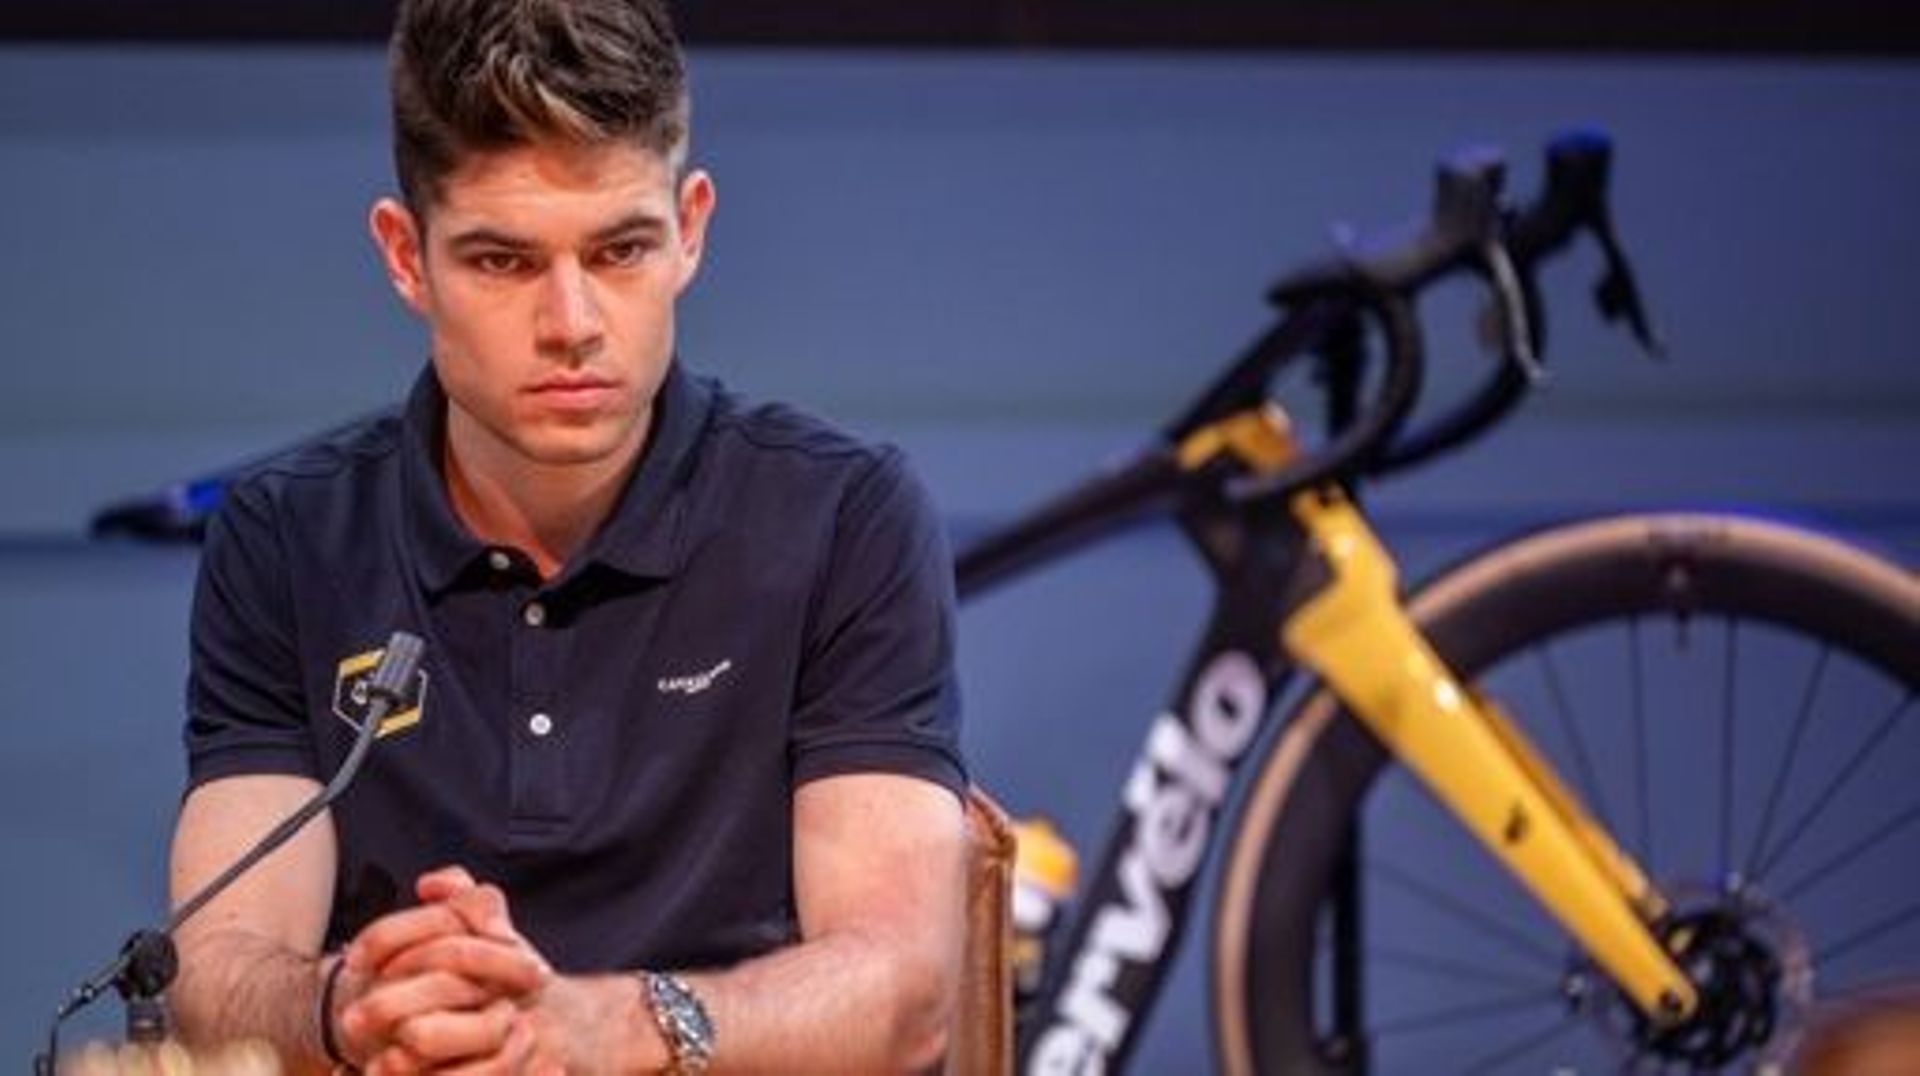 Belgian Wout Van Aert of Team Jumbo-Visma pictured during the presentation of the Team Jumbo-Visma cycling team for the 2023 cycling season, Thursday 22 December 2022, in Amsterdam, The Netherlands. BELGA PHOTO LUC CLAESSEN